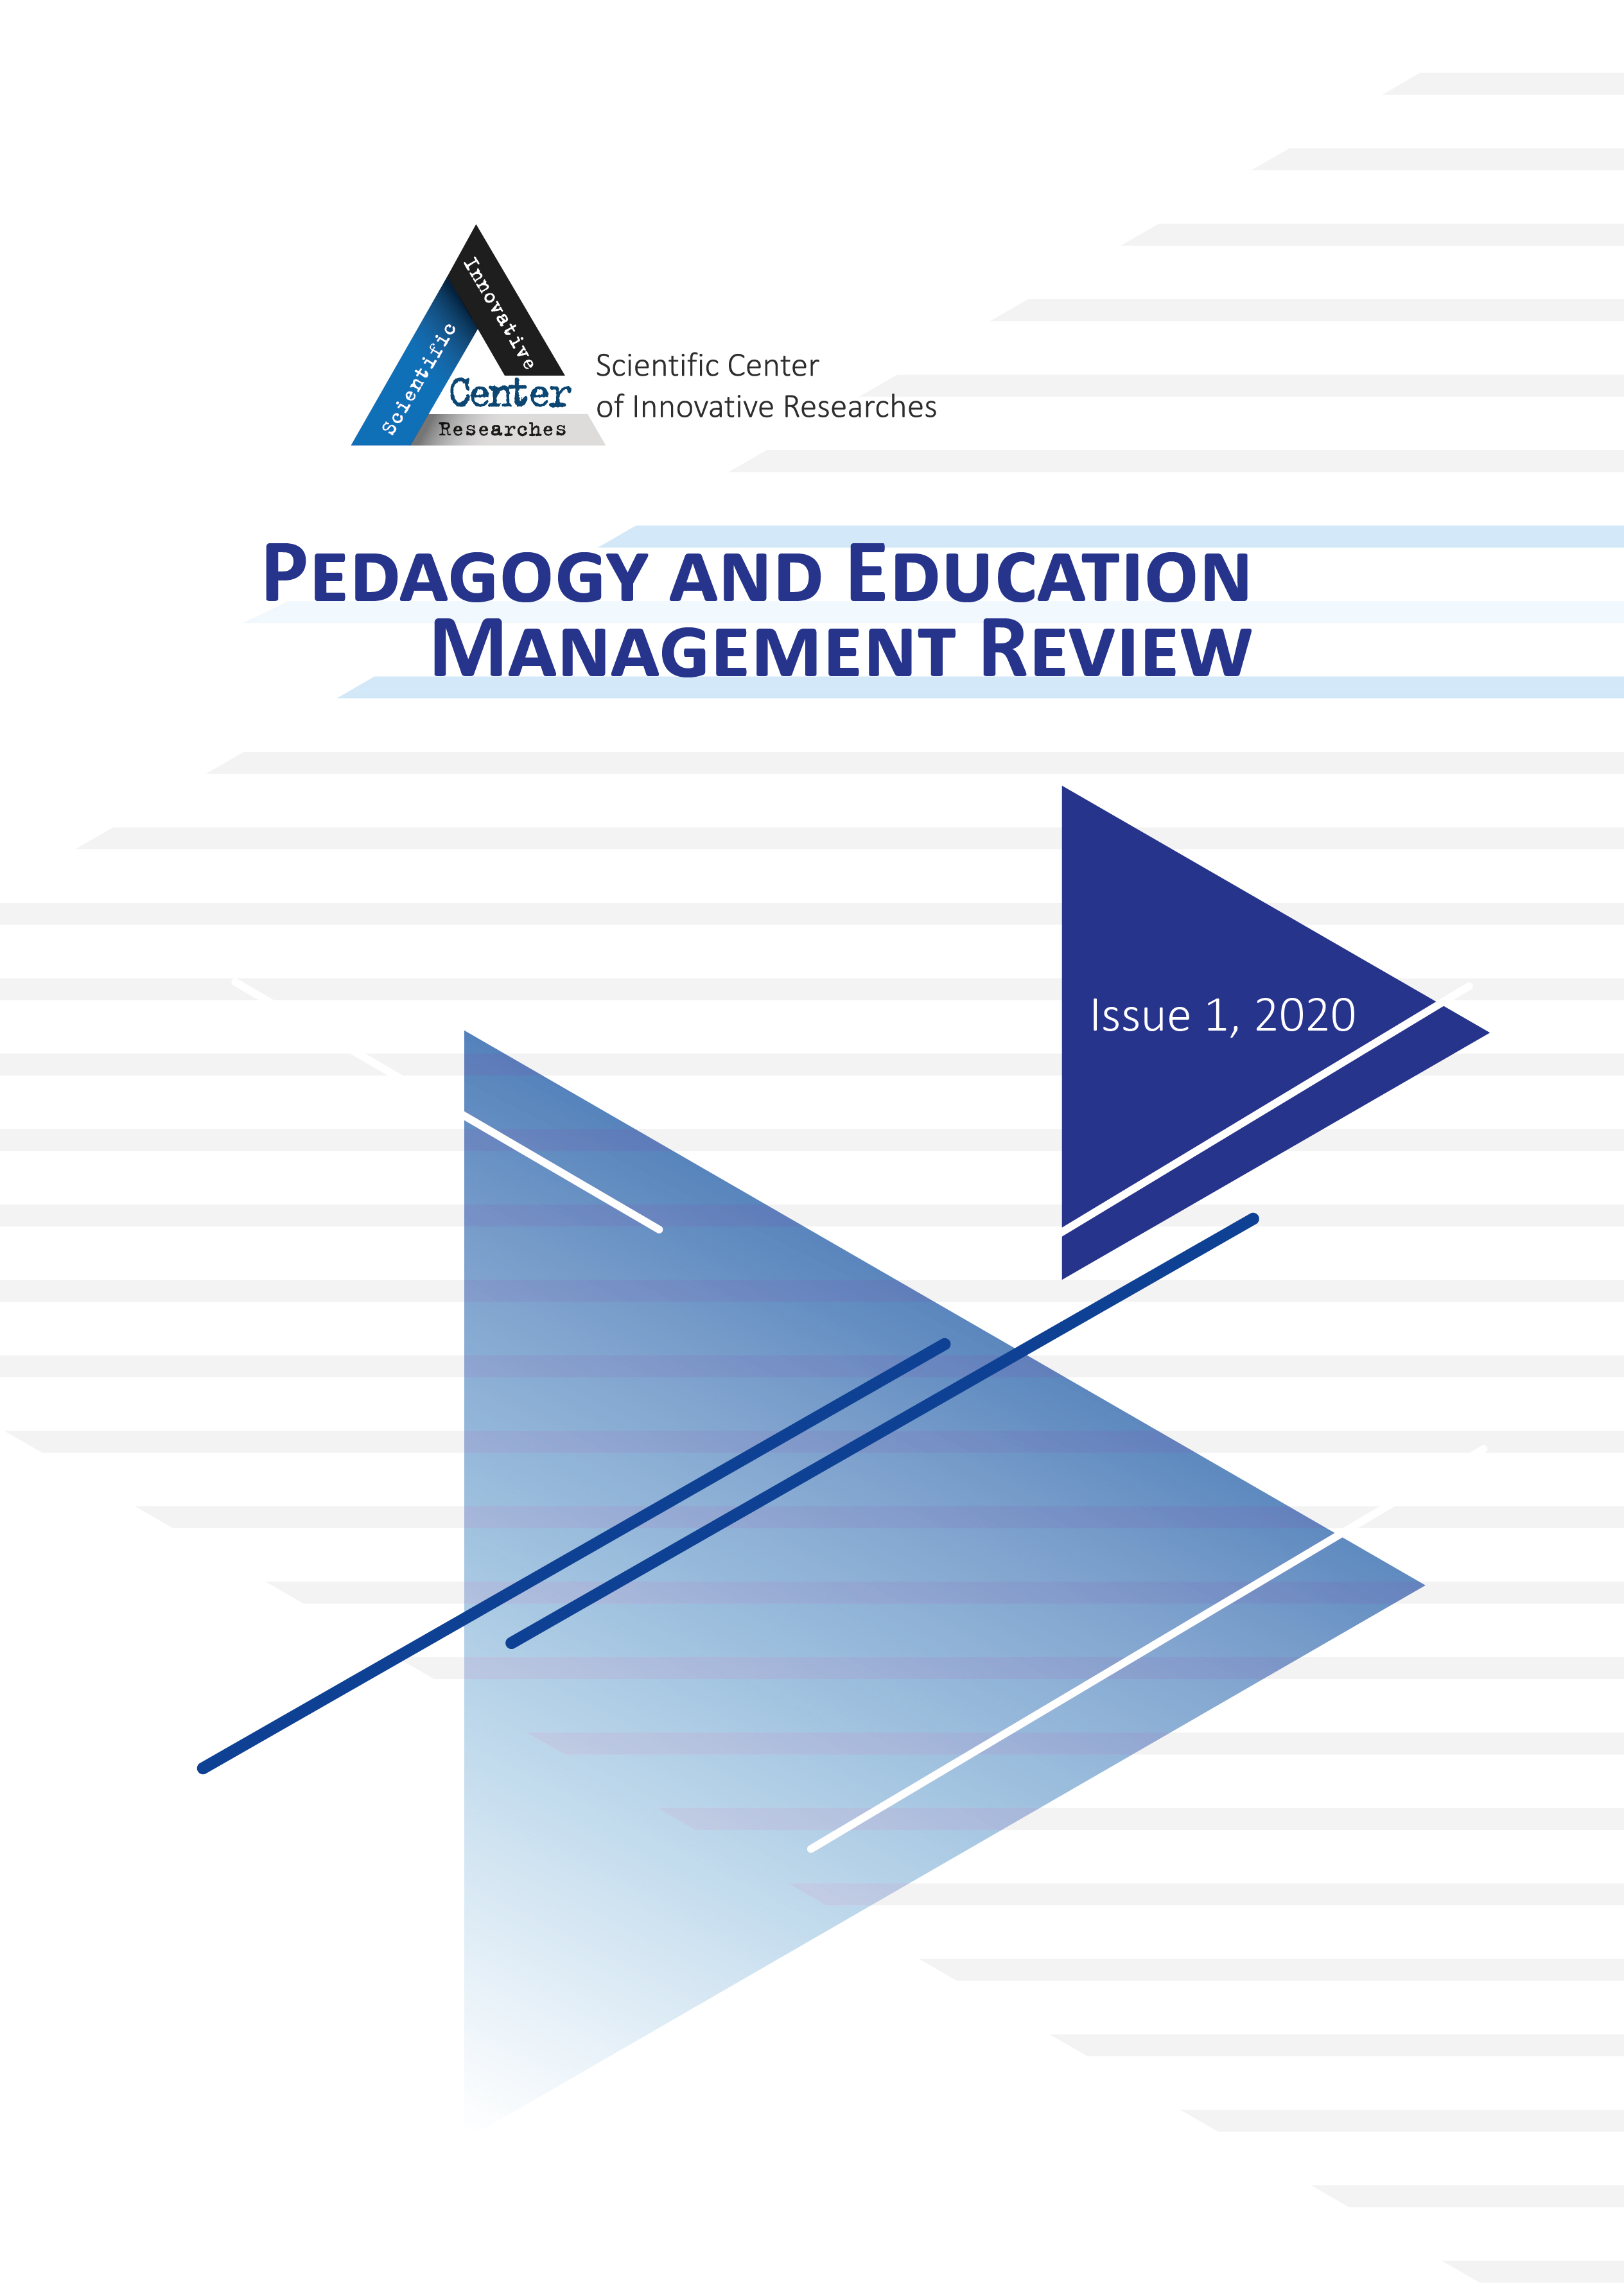 					View No. 1 (2020): PEDAGOGY AND EDUCATION MANAGEMENT REVIEW
				